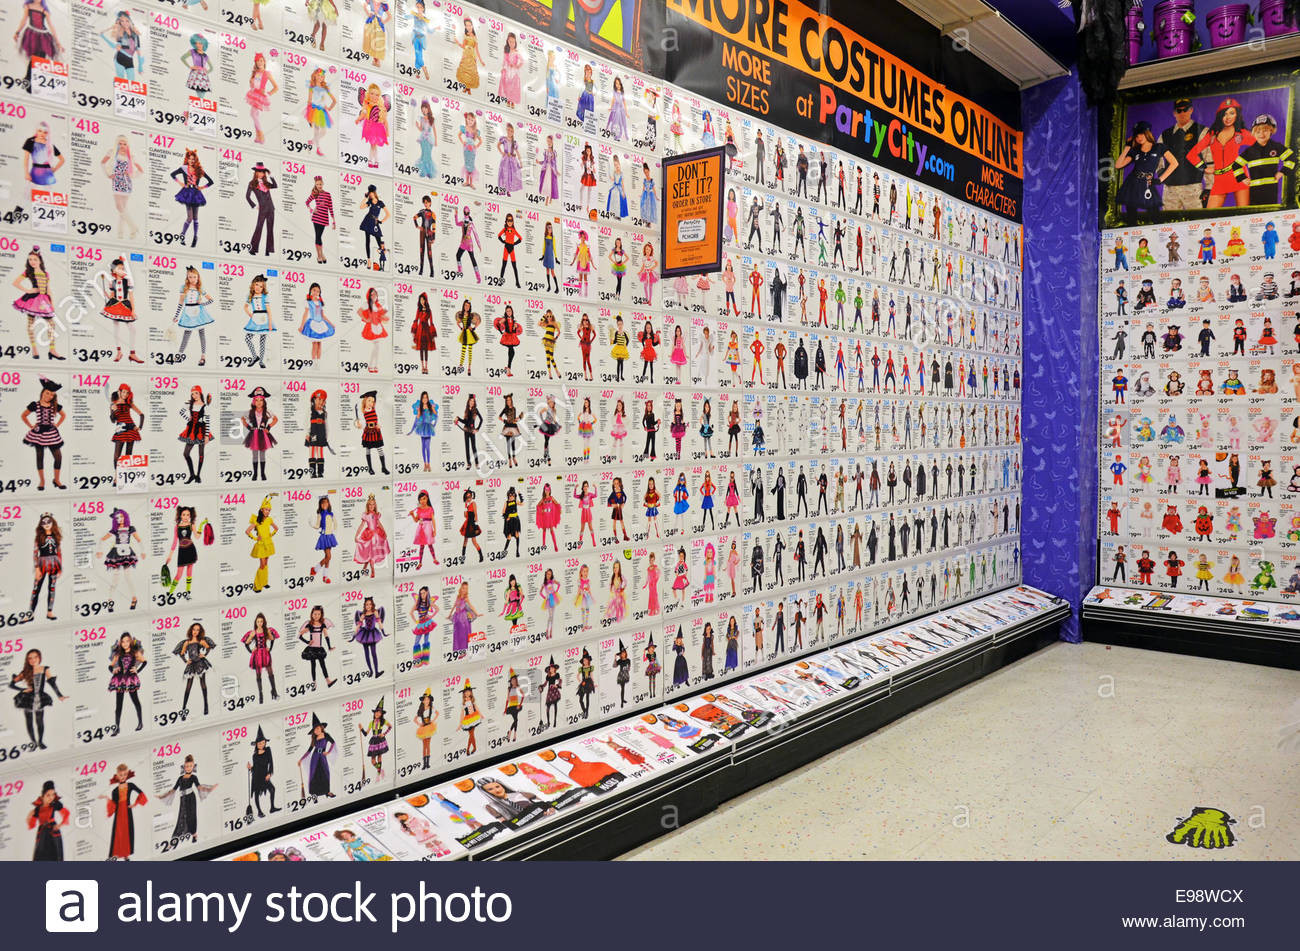 Party City Store Halloween Costumes
 The Best Places To Get Your Halloween Costumes BurntX